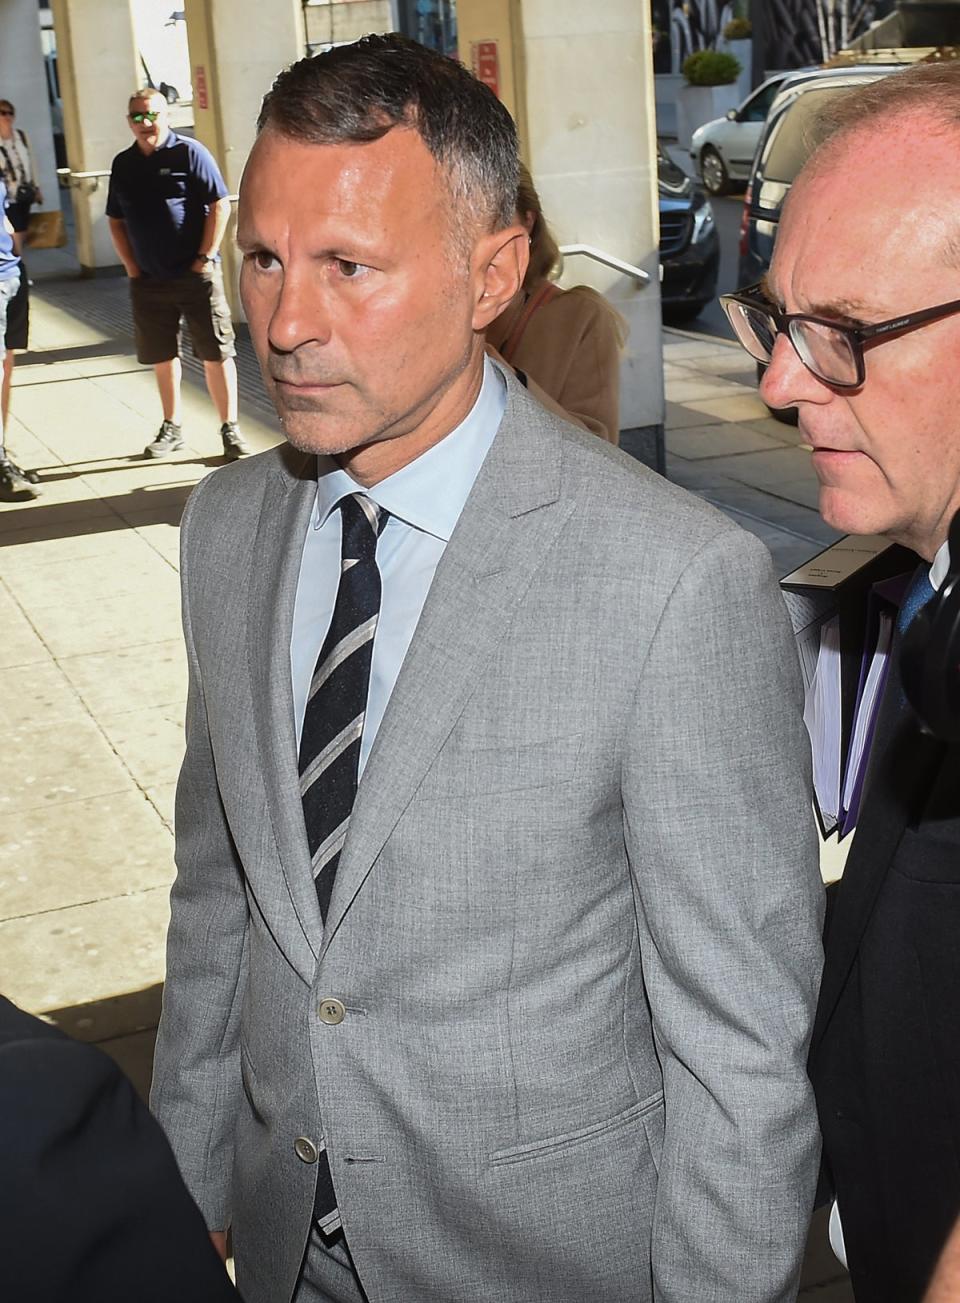 Ryan Giggs is on trial accused of assault (PA Wire)